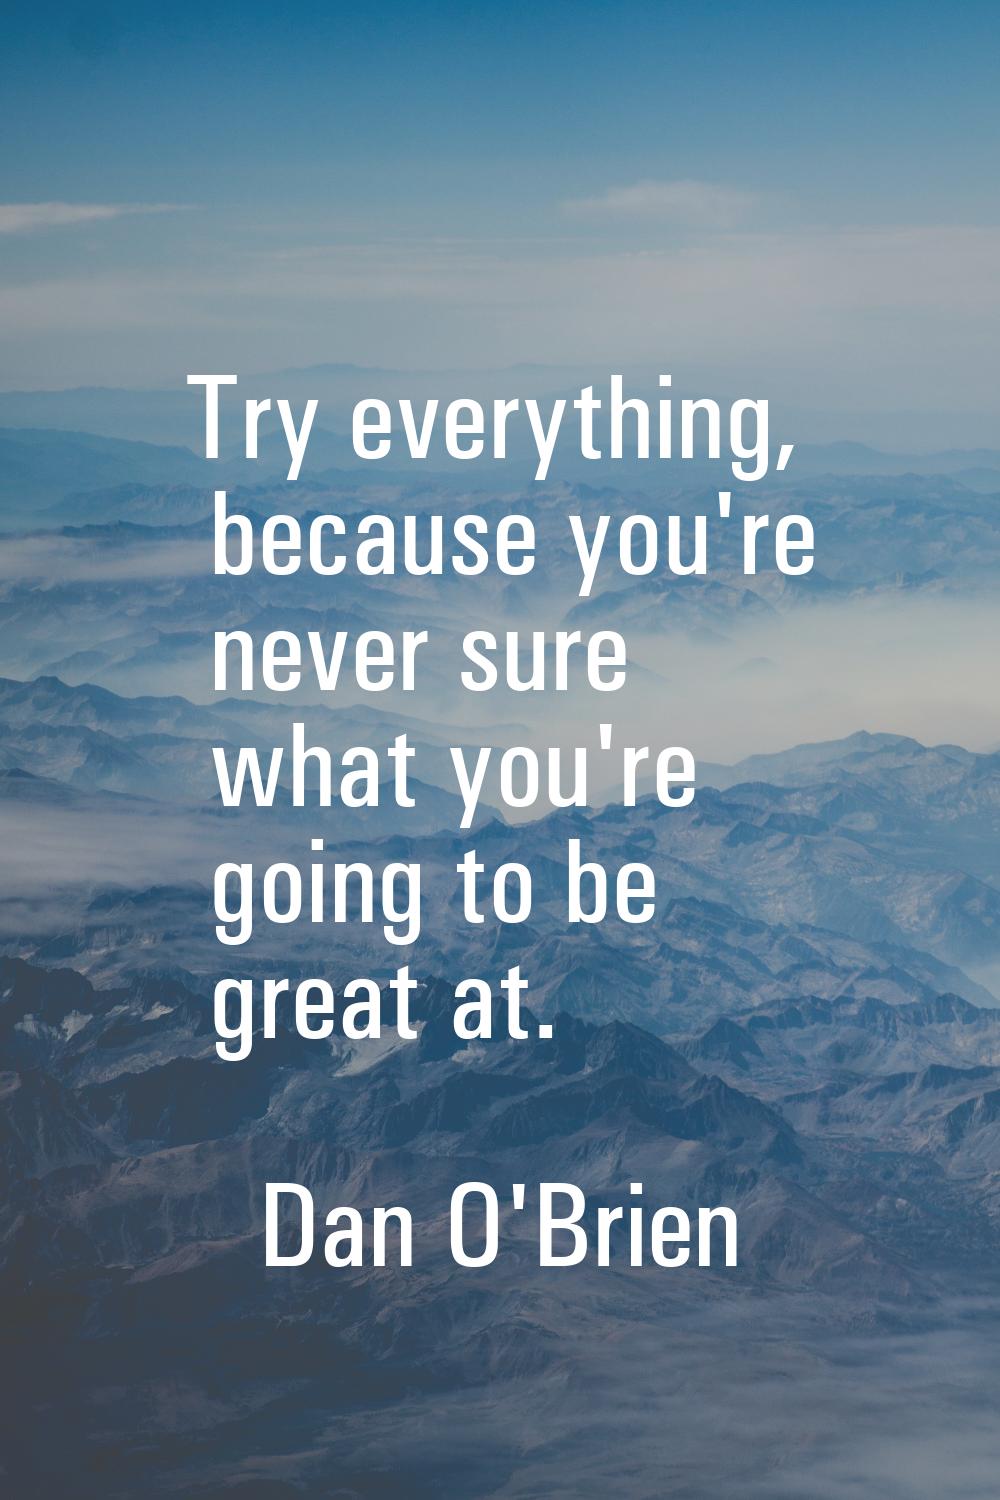 Try everything, because you're never sure what you're going to be great at.